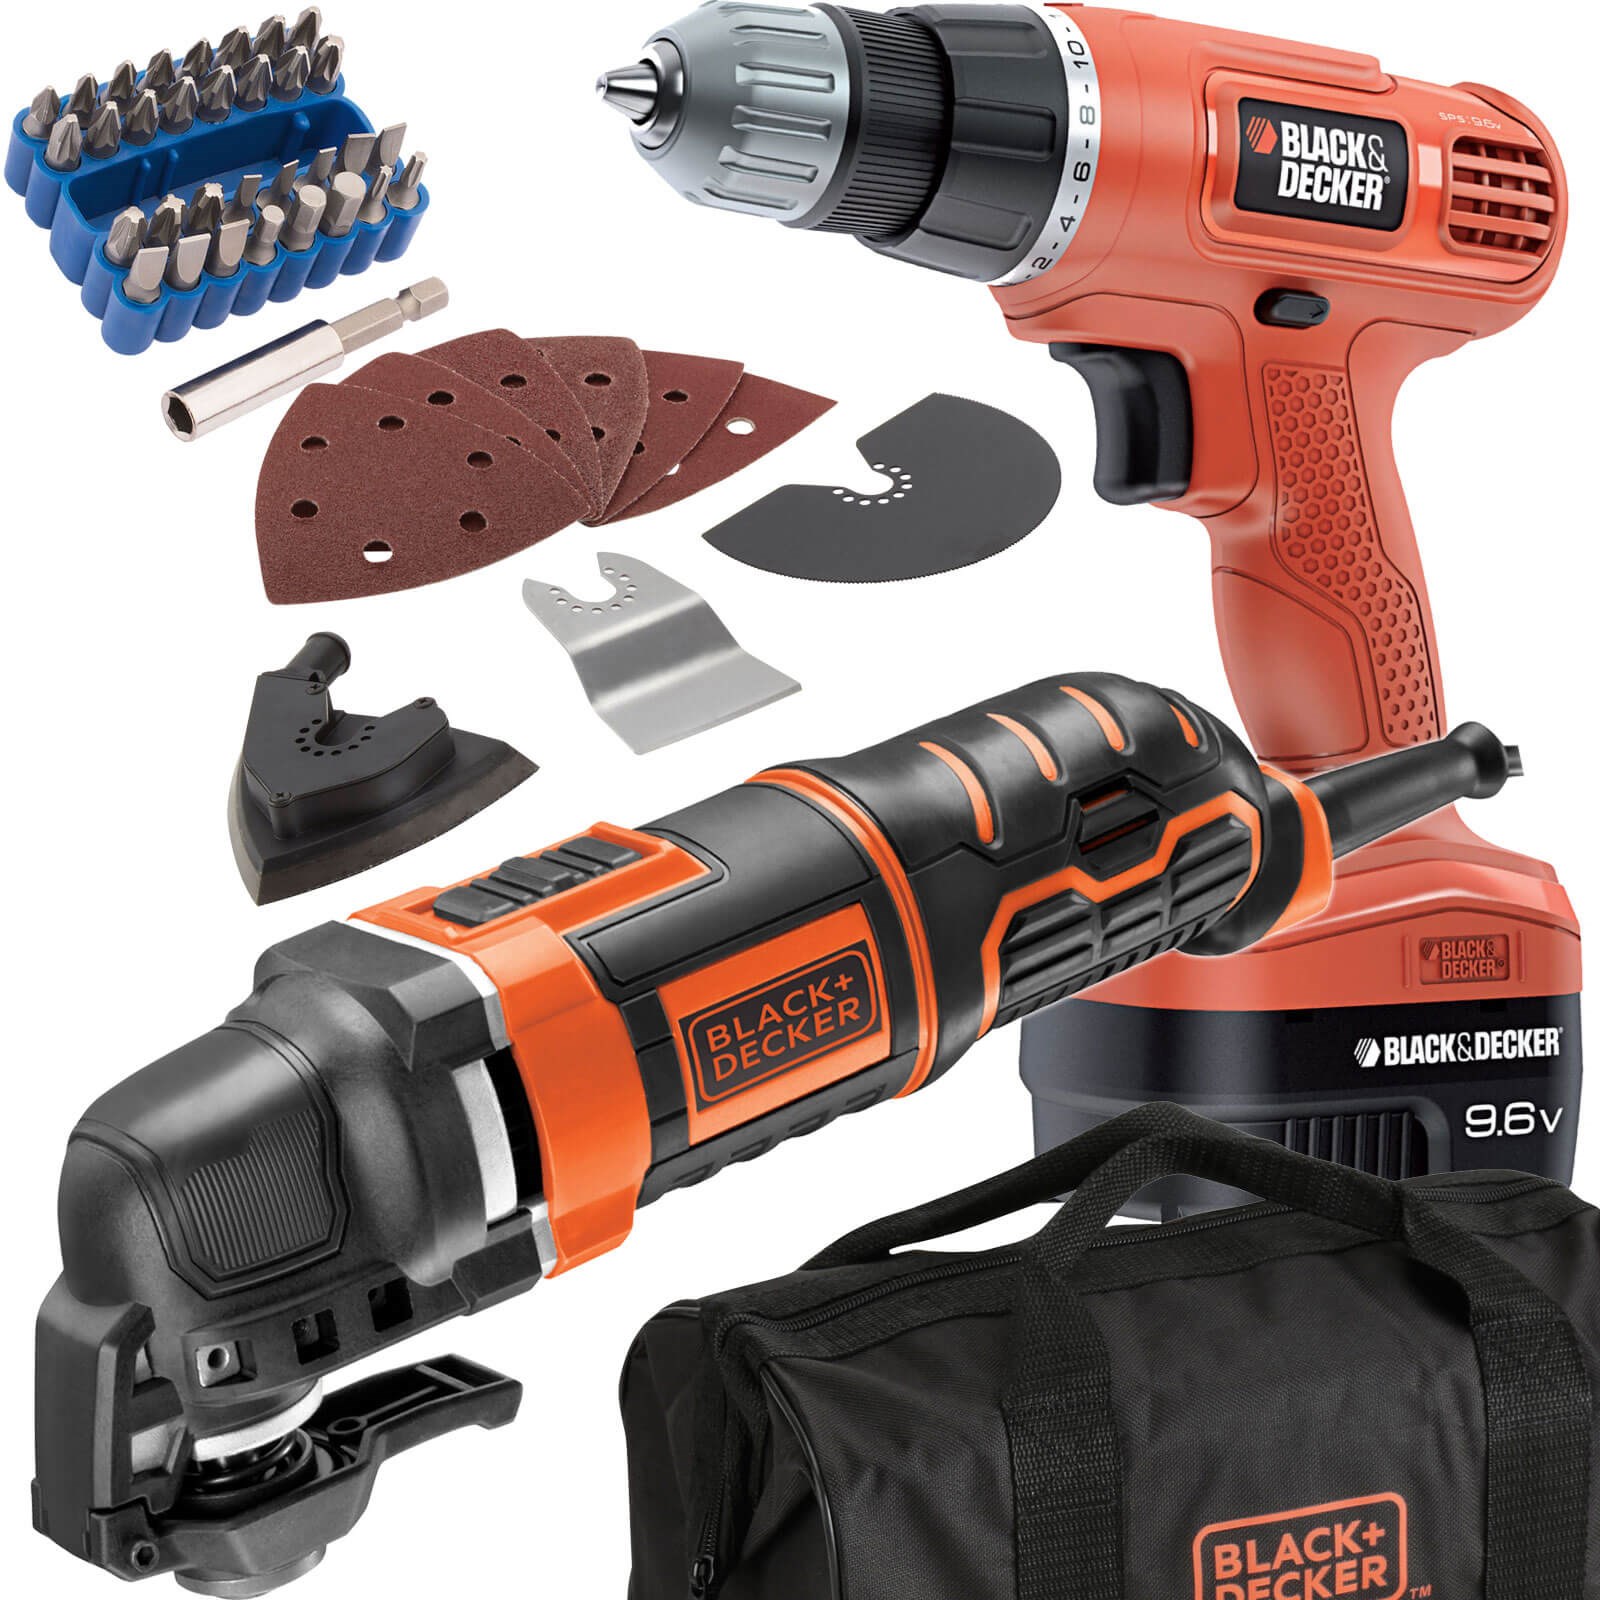 Black and Decker MT280BA Oscillating Multi Tool and Cordless Drill Kit